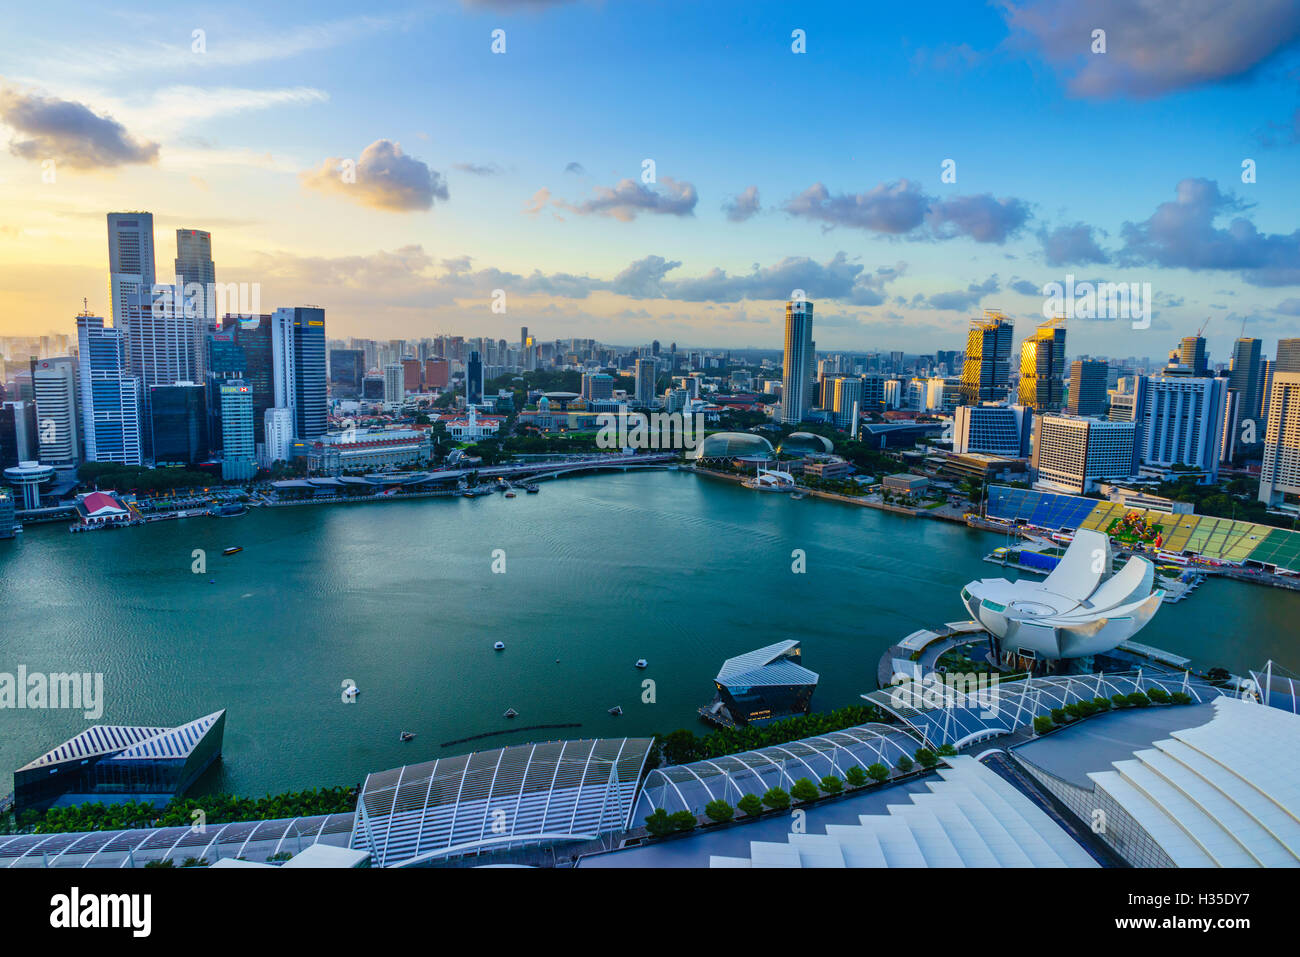 The towers of the Central Business District and Marina Bay at sunset, Singapore Stock Photo